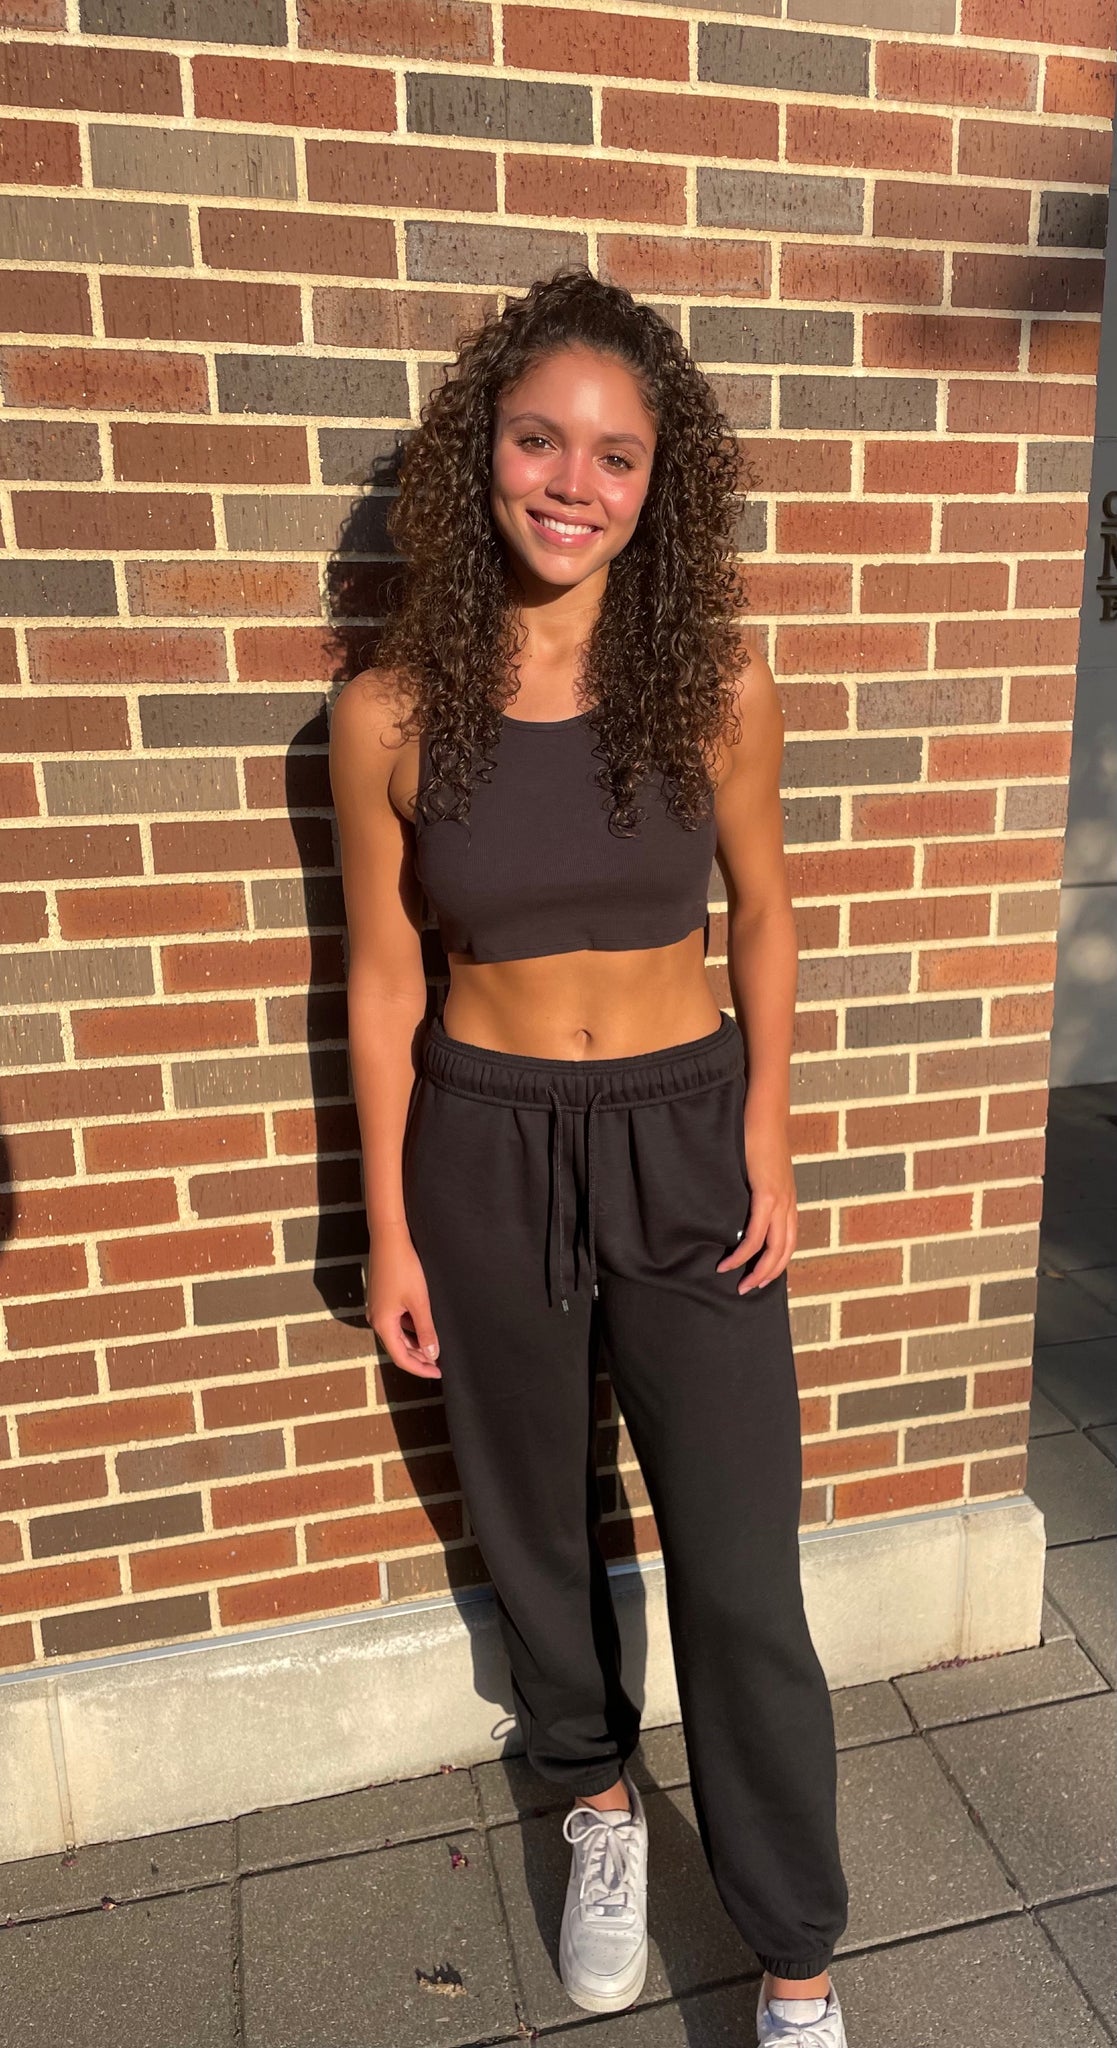 Zairyn Hemsley wearing Accolade Sweatpants and a Ribbed Vibe Tank both in Black while posing in front of a brick wall.  